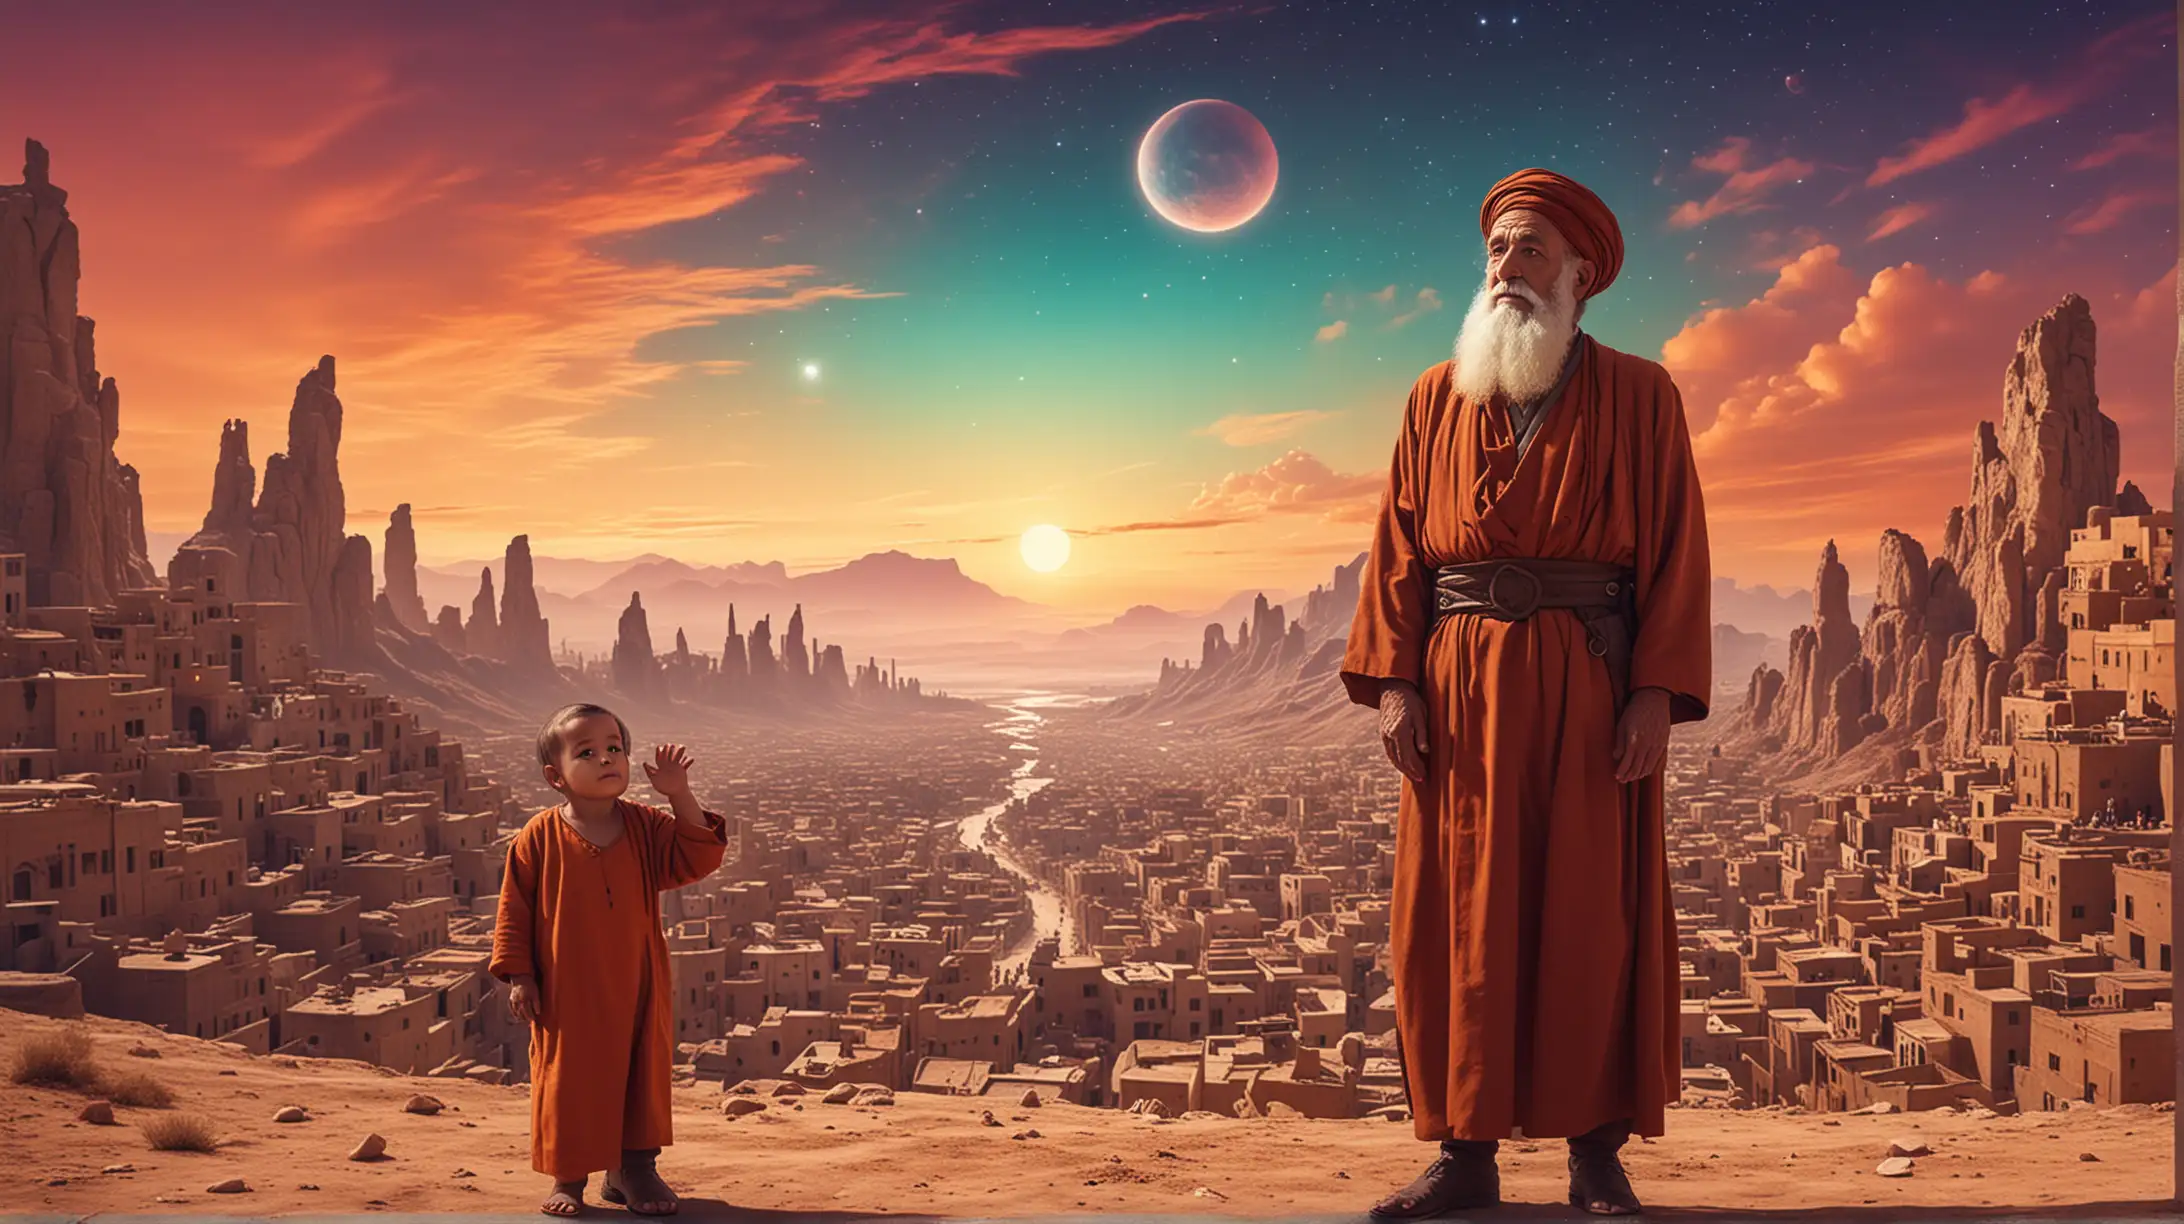 Ancient Biblical Abraham and Baby Ismael in Futuristic Cityscape with Vibrant Celestial Elements